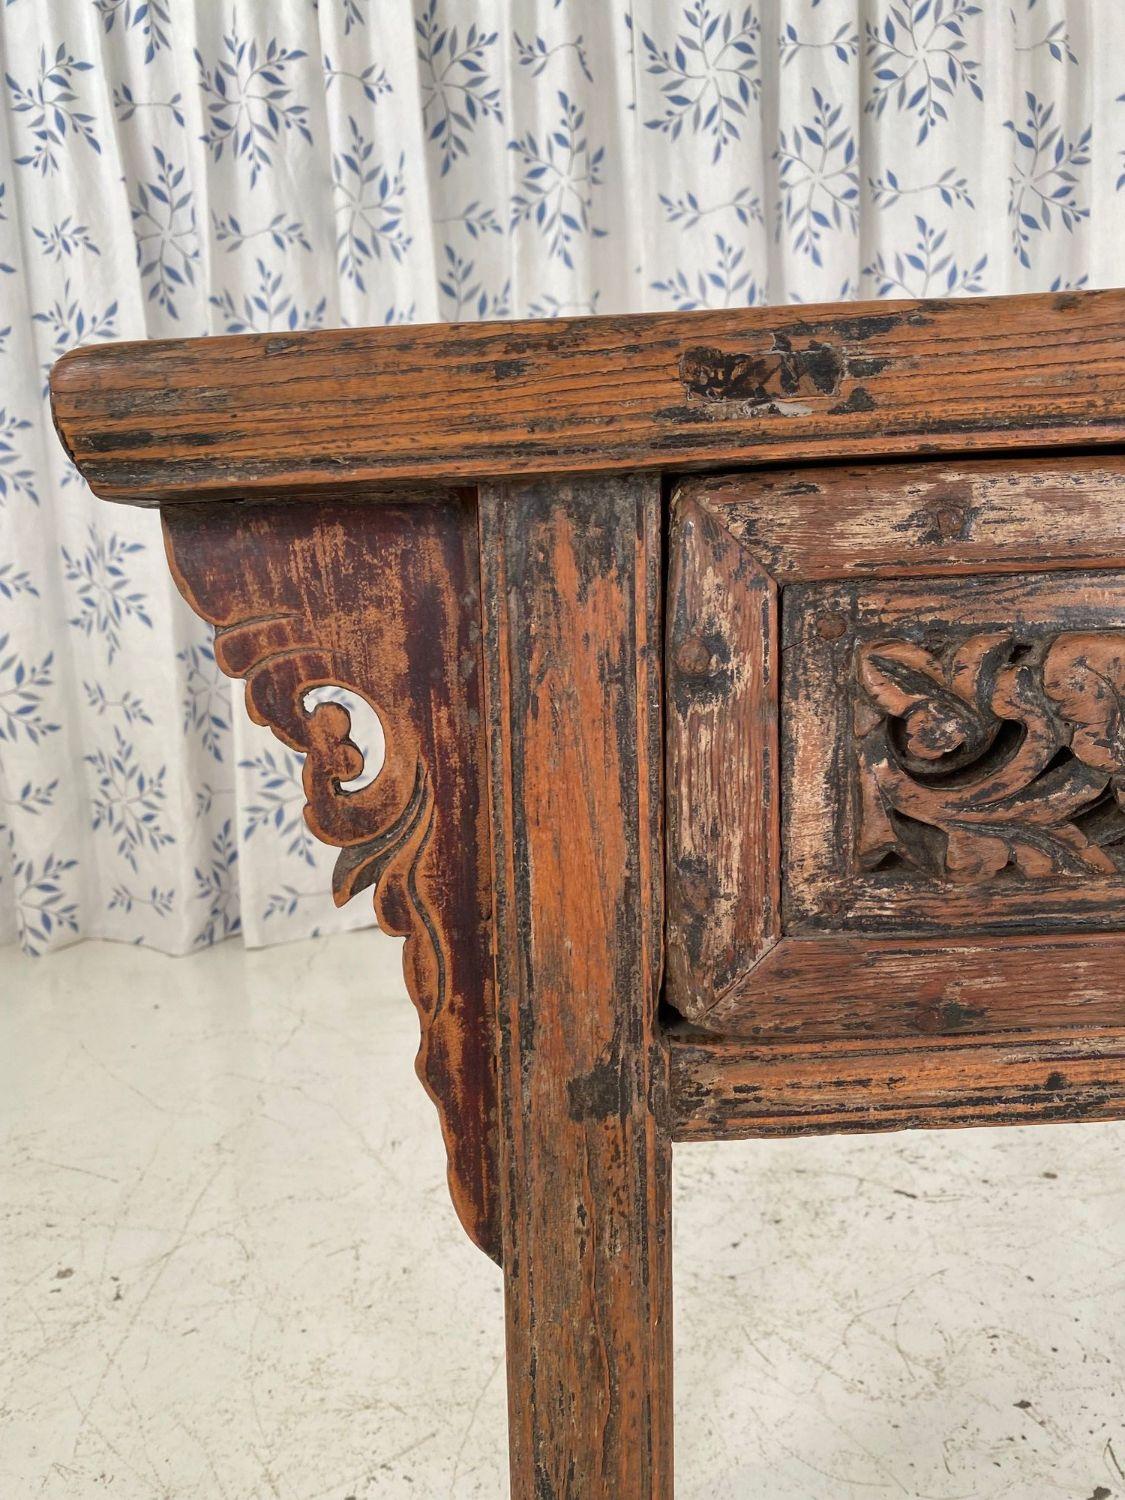 A late 19th-century Chinese Alter table. This Alter table features a deeply carved drawer front with the original metal drop pull handle. The drawer has a leaf pattern and dovetail joinery. This table was most recently purchased from CC Wong in